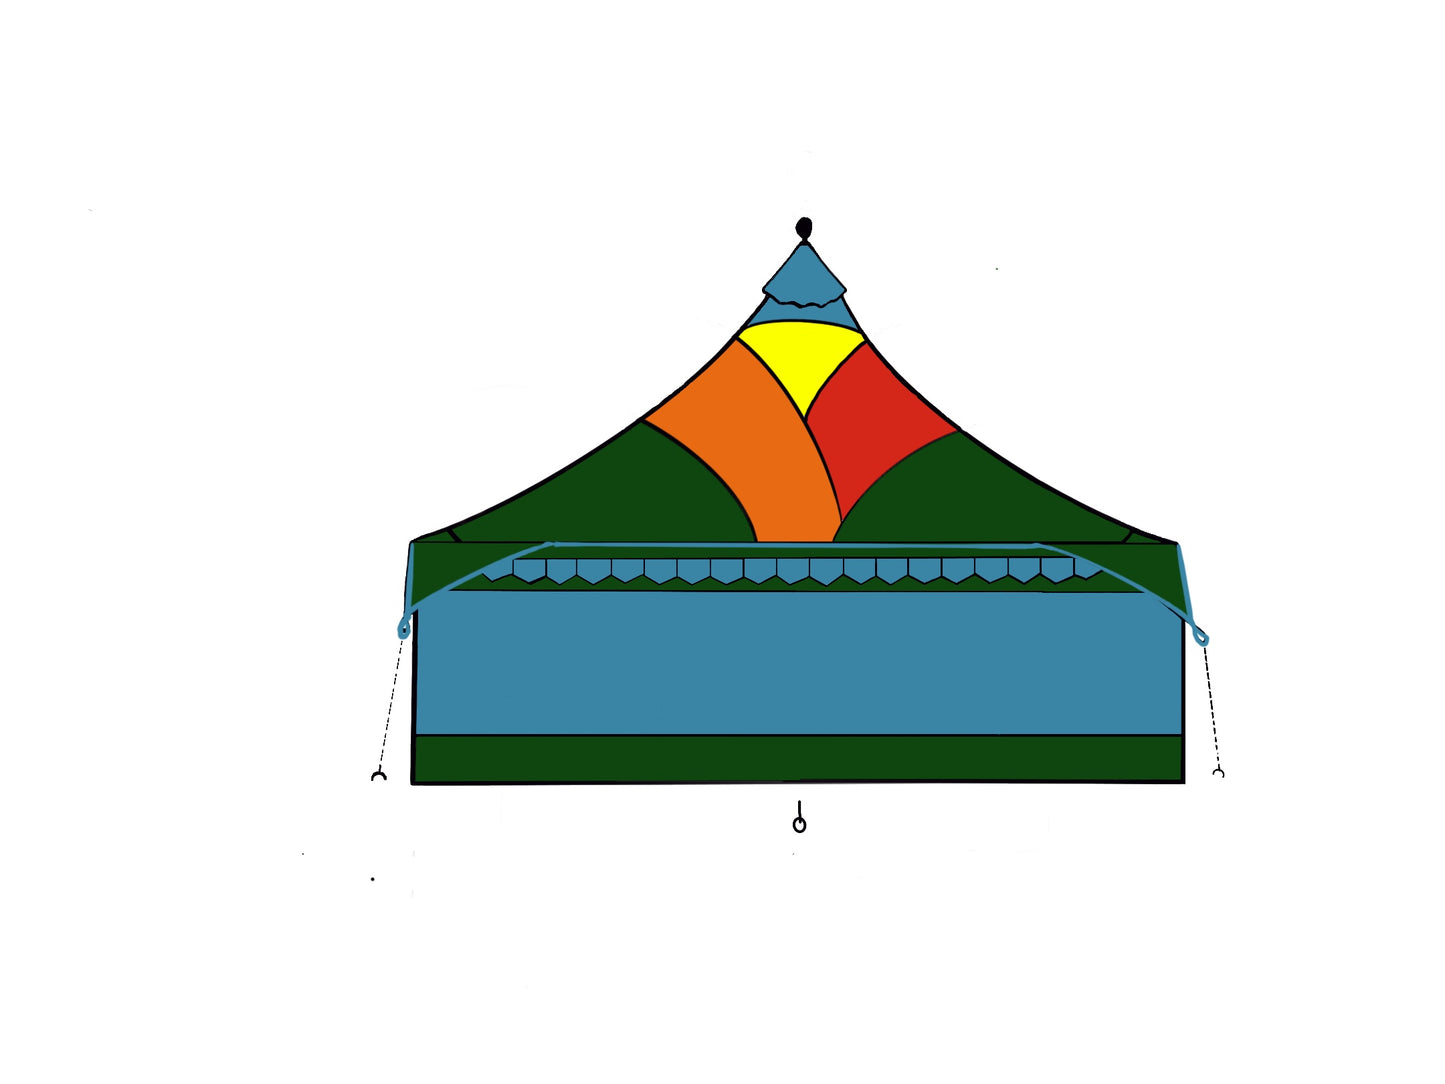 Oakenfoot Poppy theme pattern, 15-foot square, complete pavilion style tent system